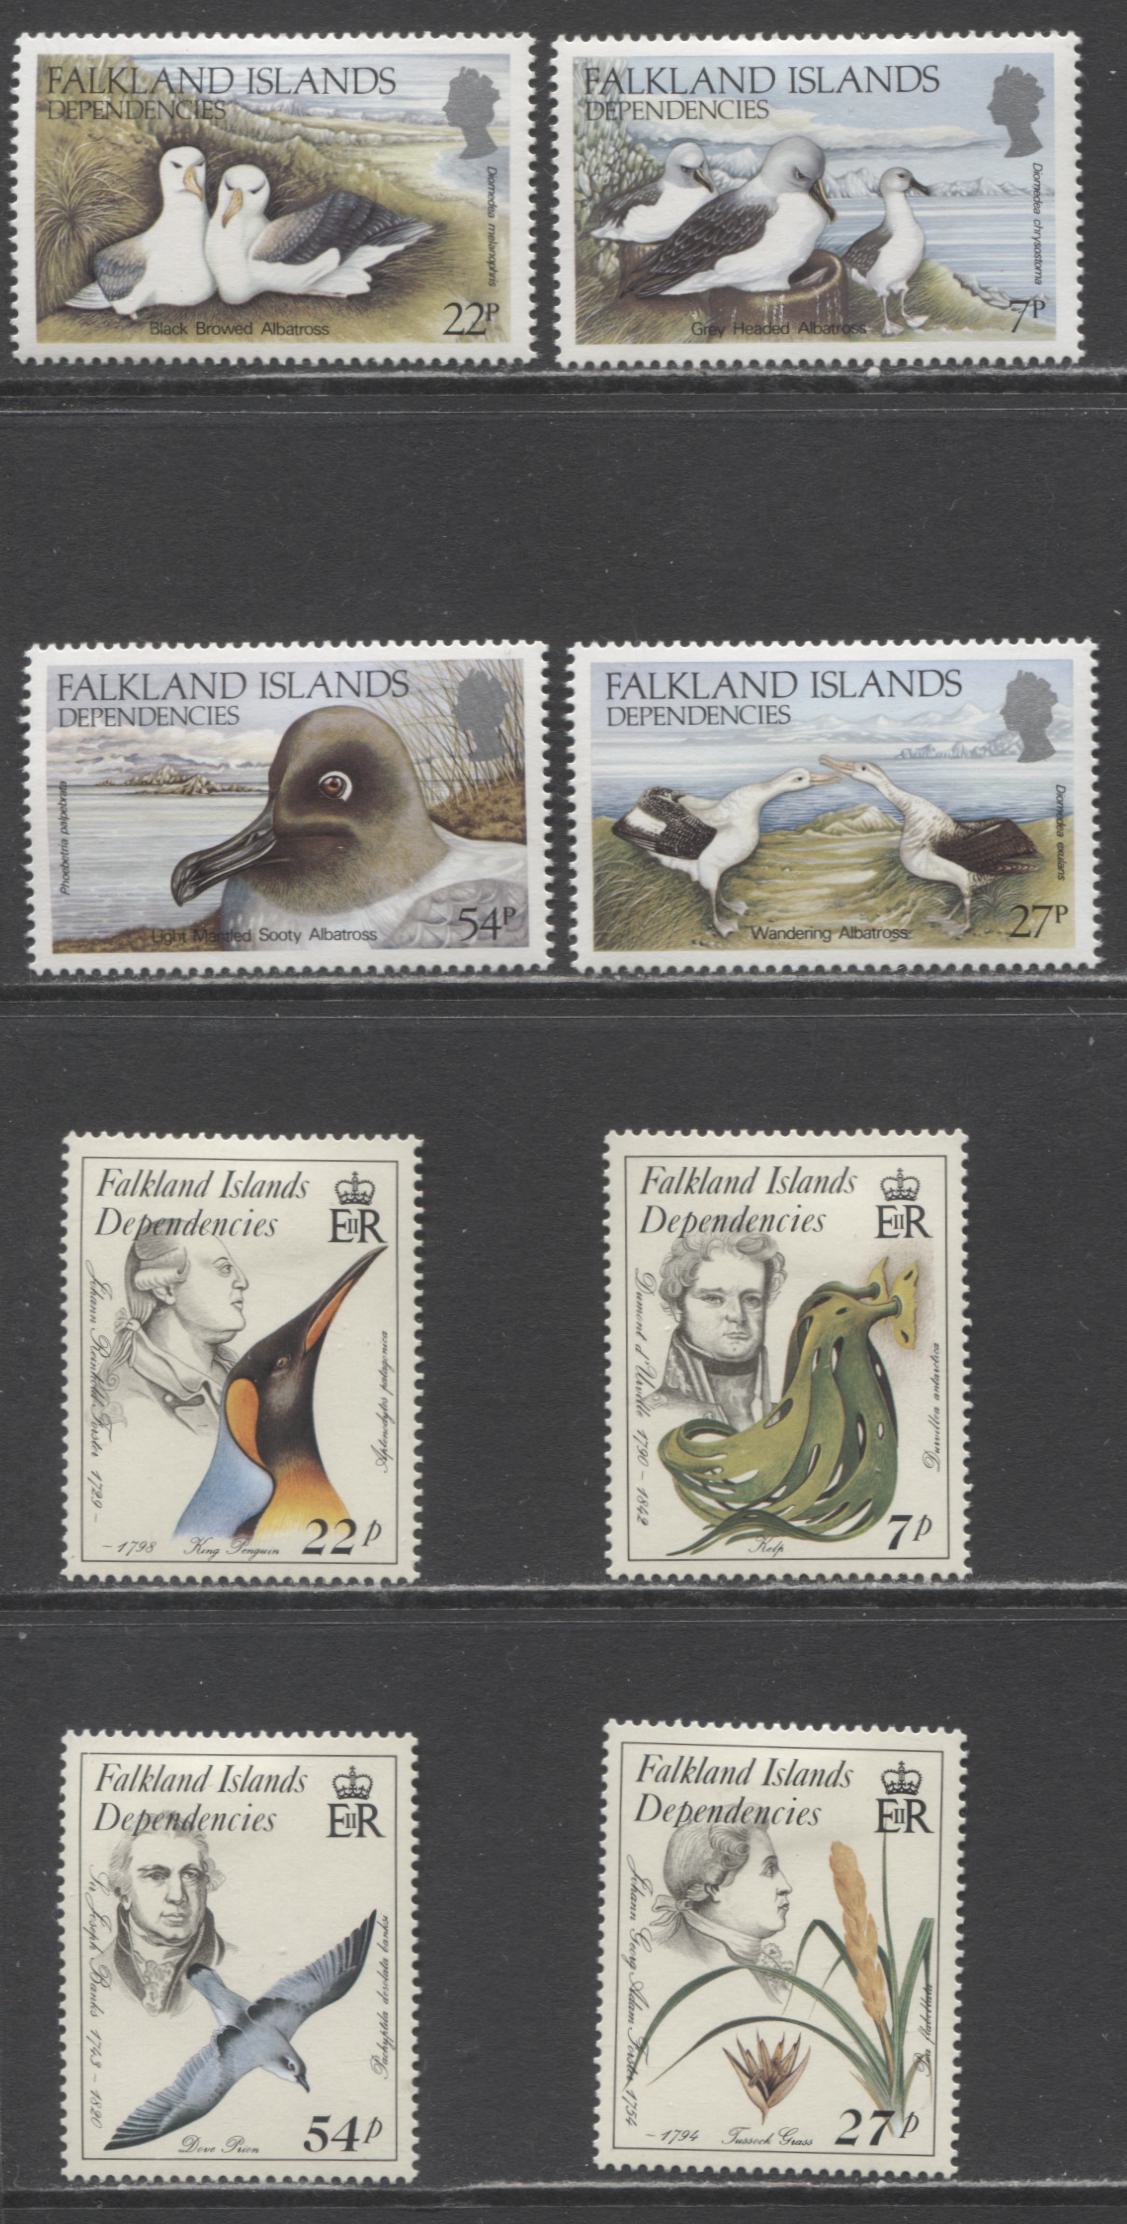 Lot 142 Falkland Islands Dependencies SC#1L88/1L100 1985 Albatrosses - Naturalists Issues, 8 VFOG Singles, Click on Listing to See ALL Pictures, Estimated Value $10